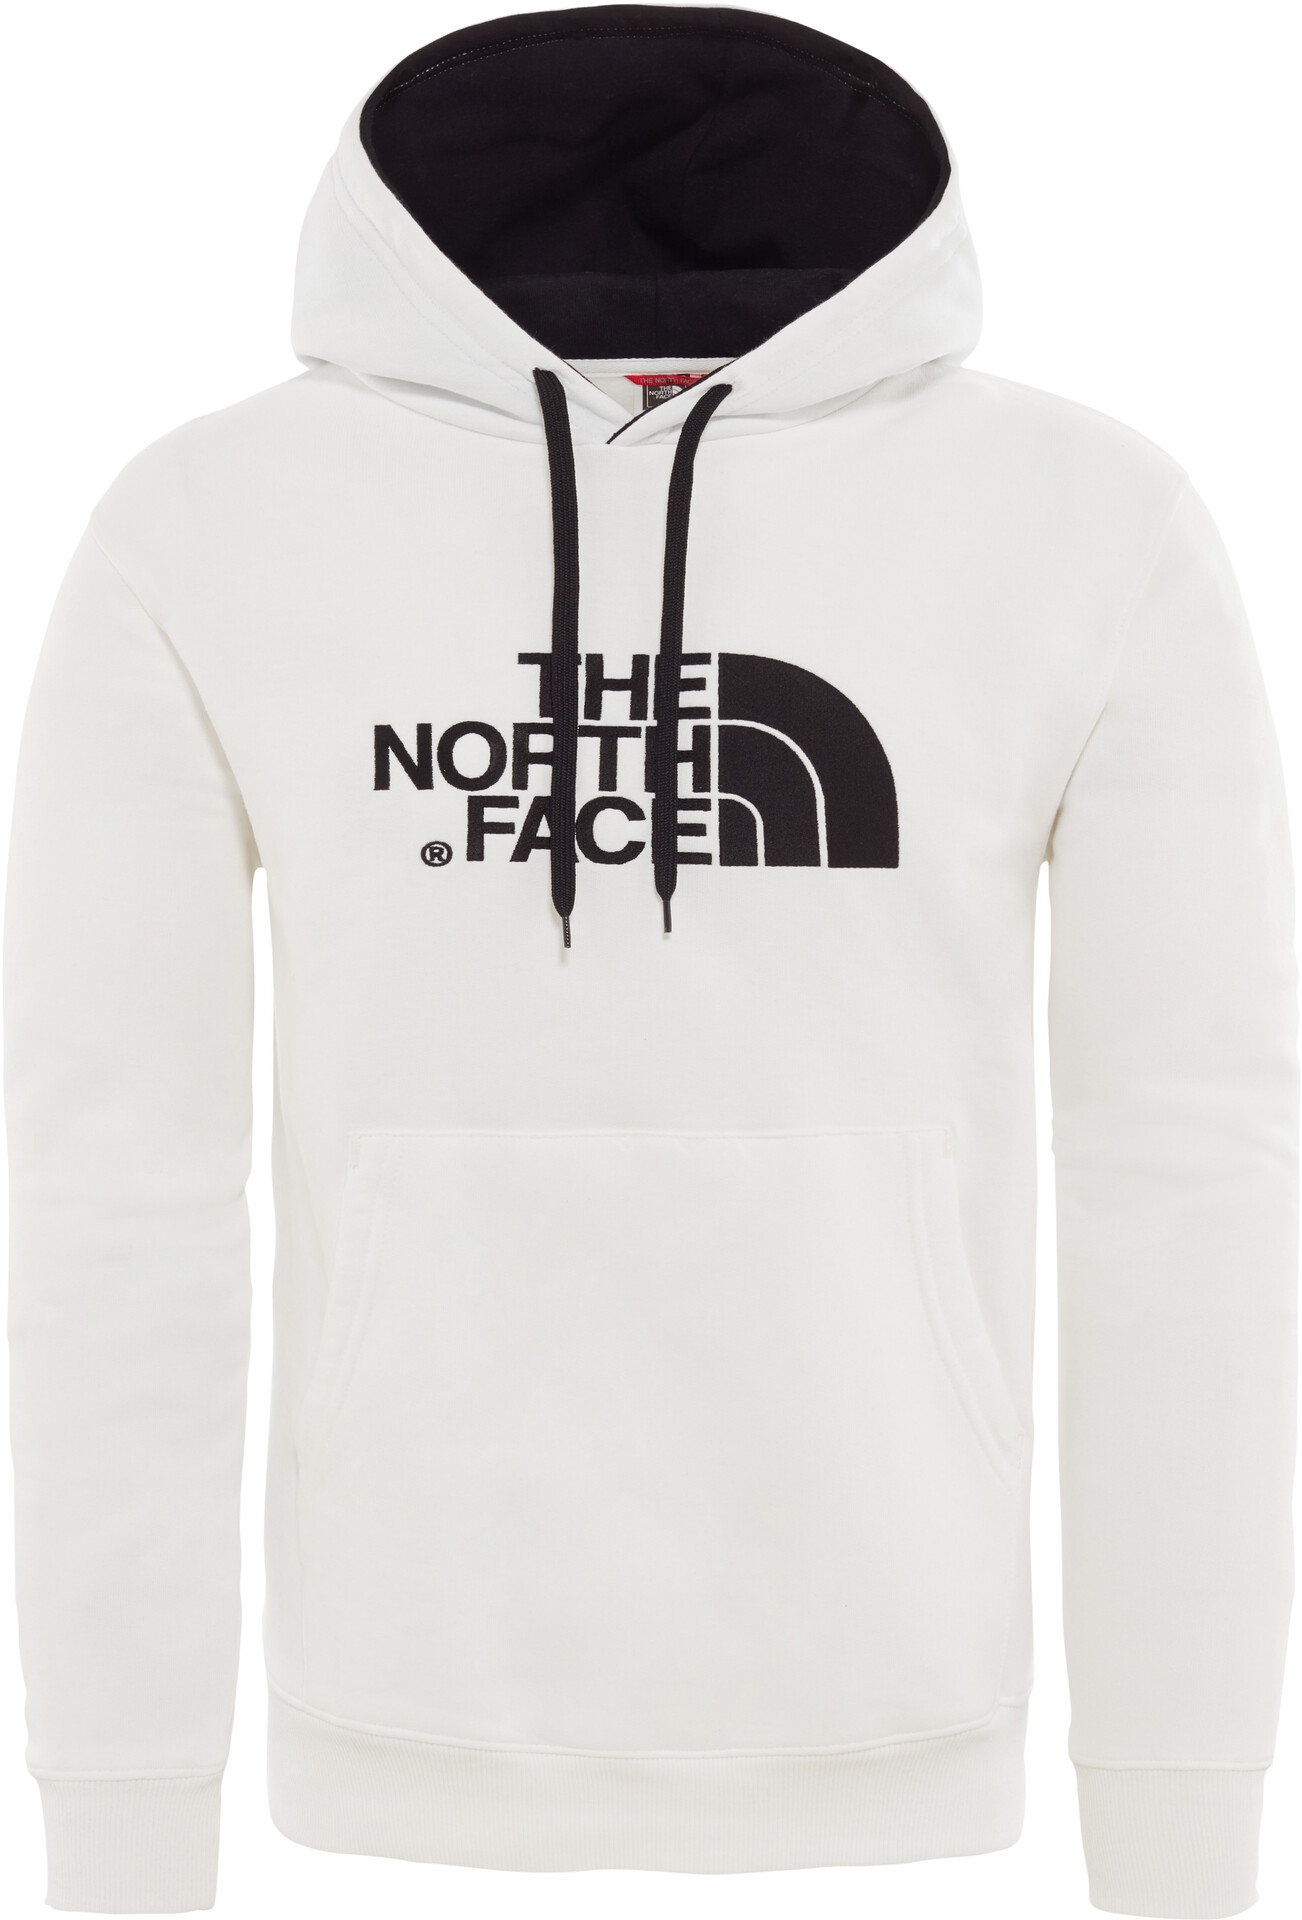 white north face sweater